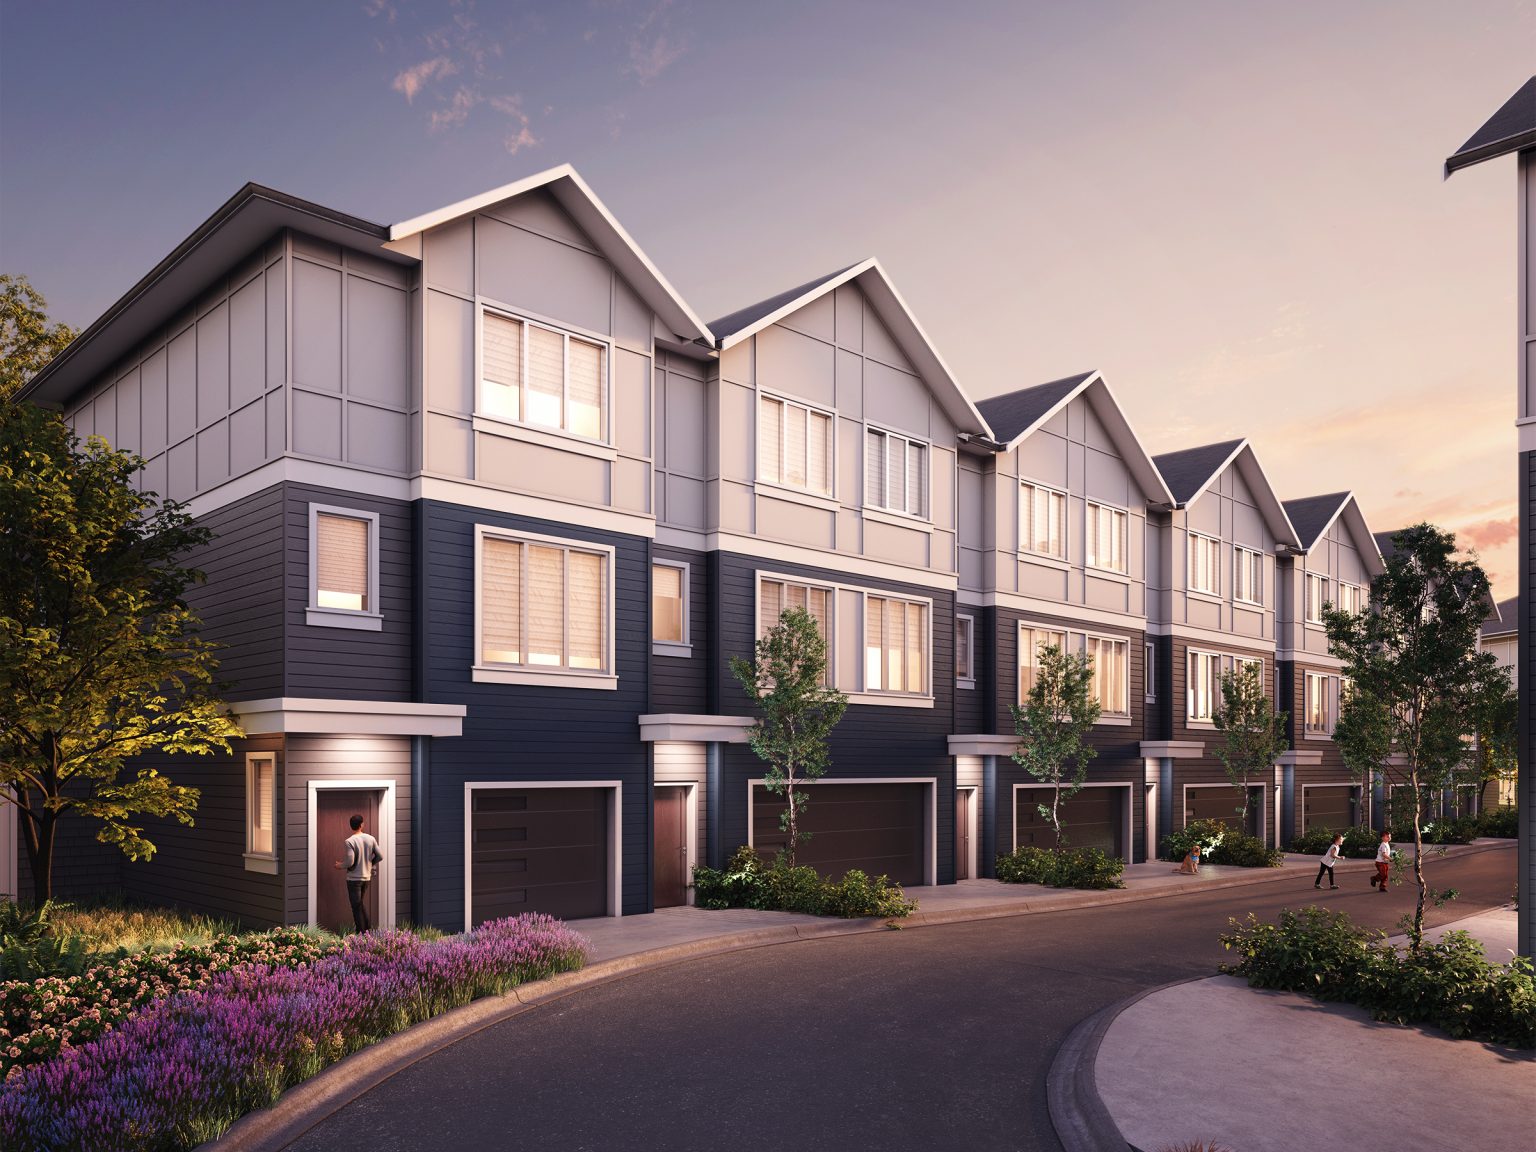 These 3-storey townhouses feature double garages, private backyards with patios, and second floor balconies.